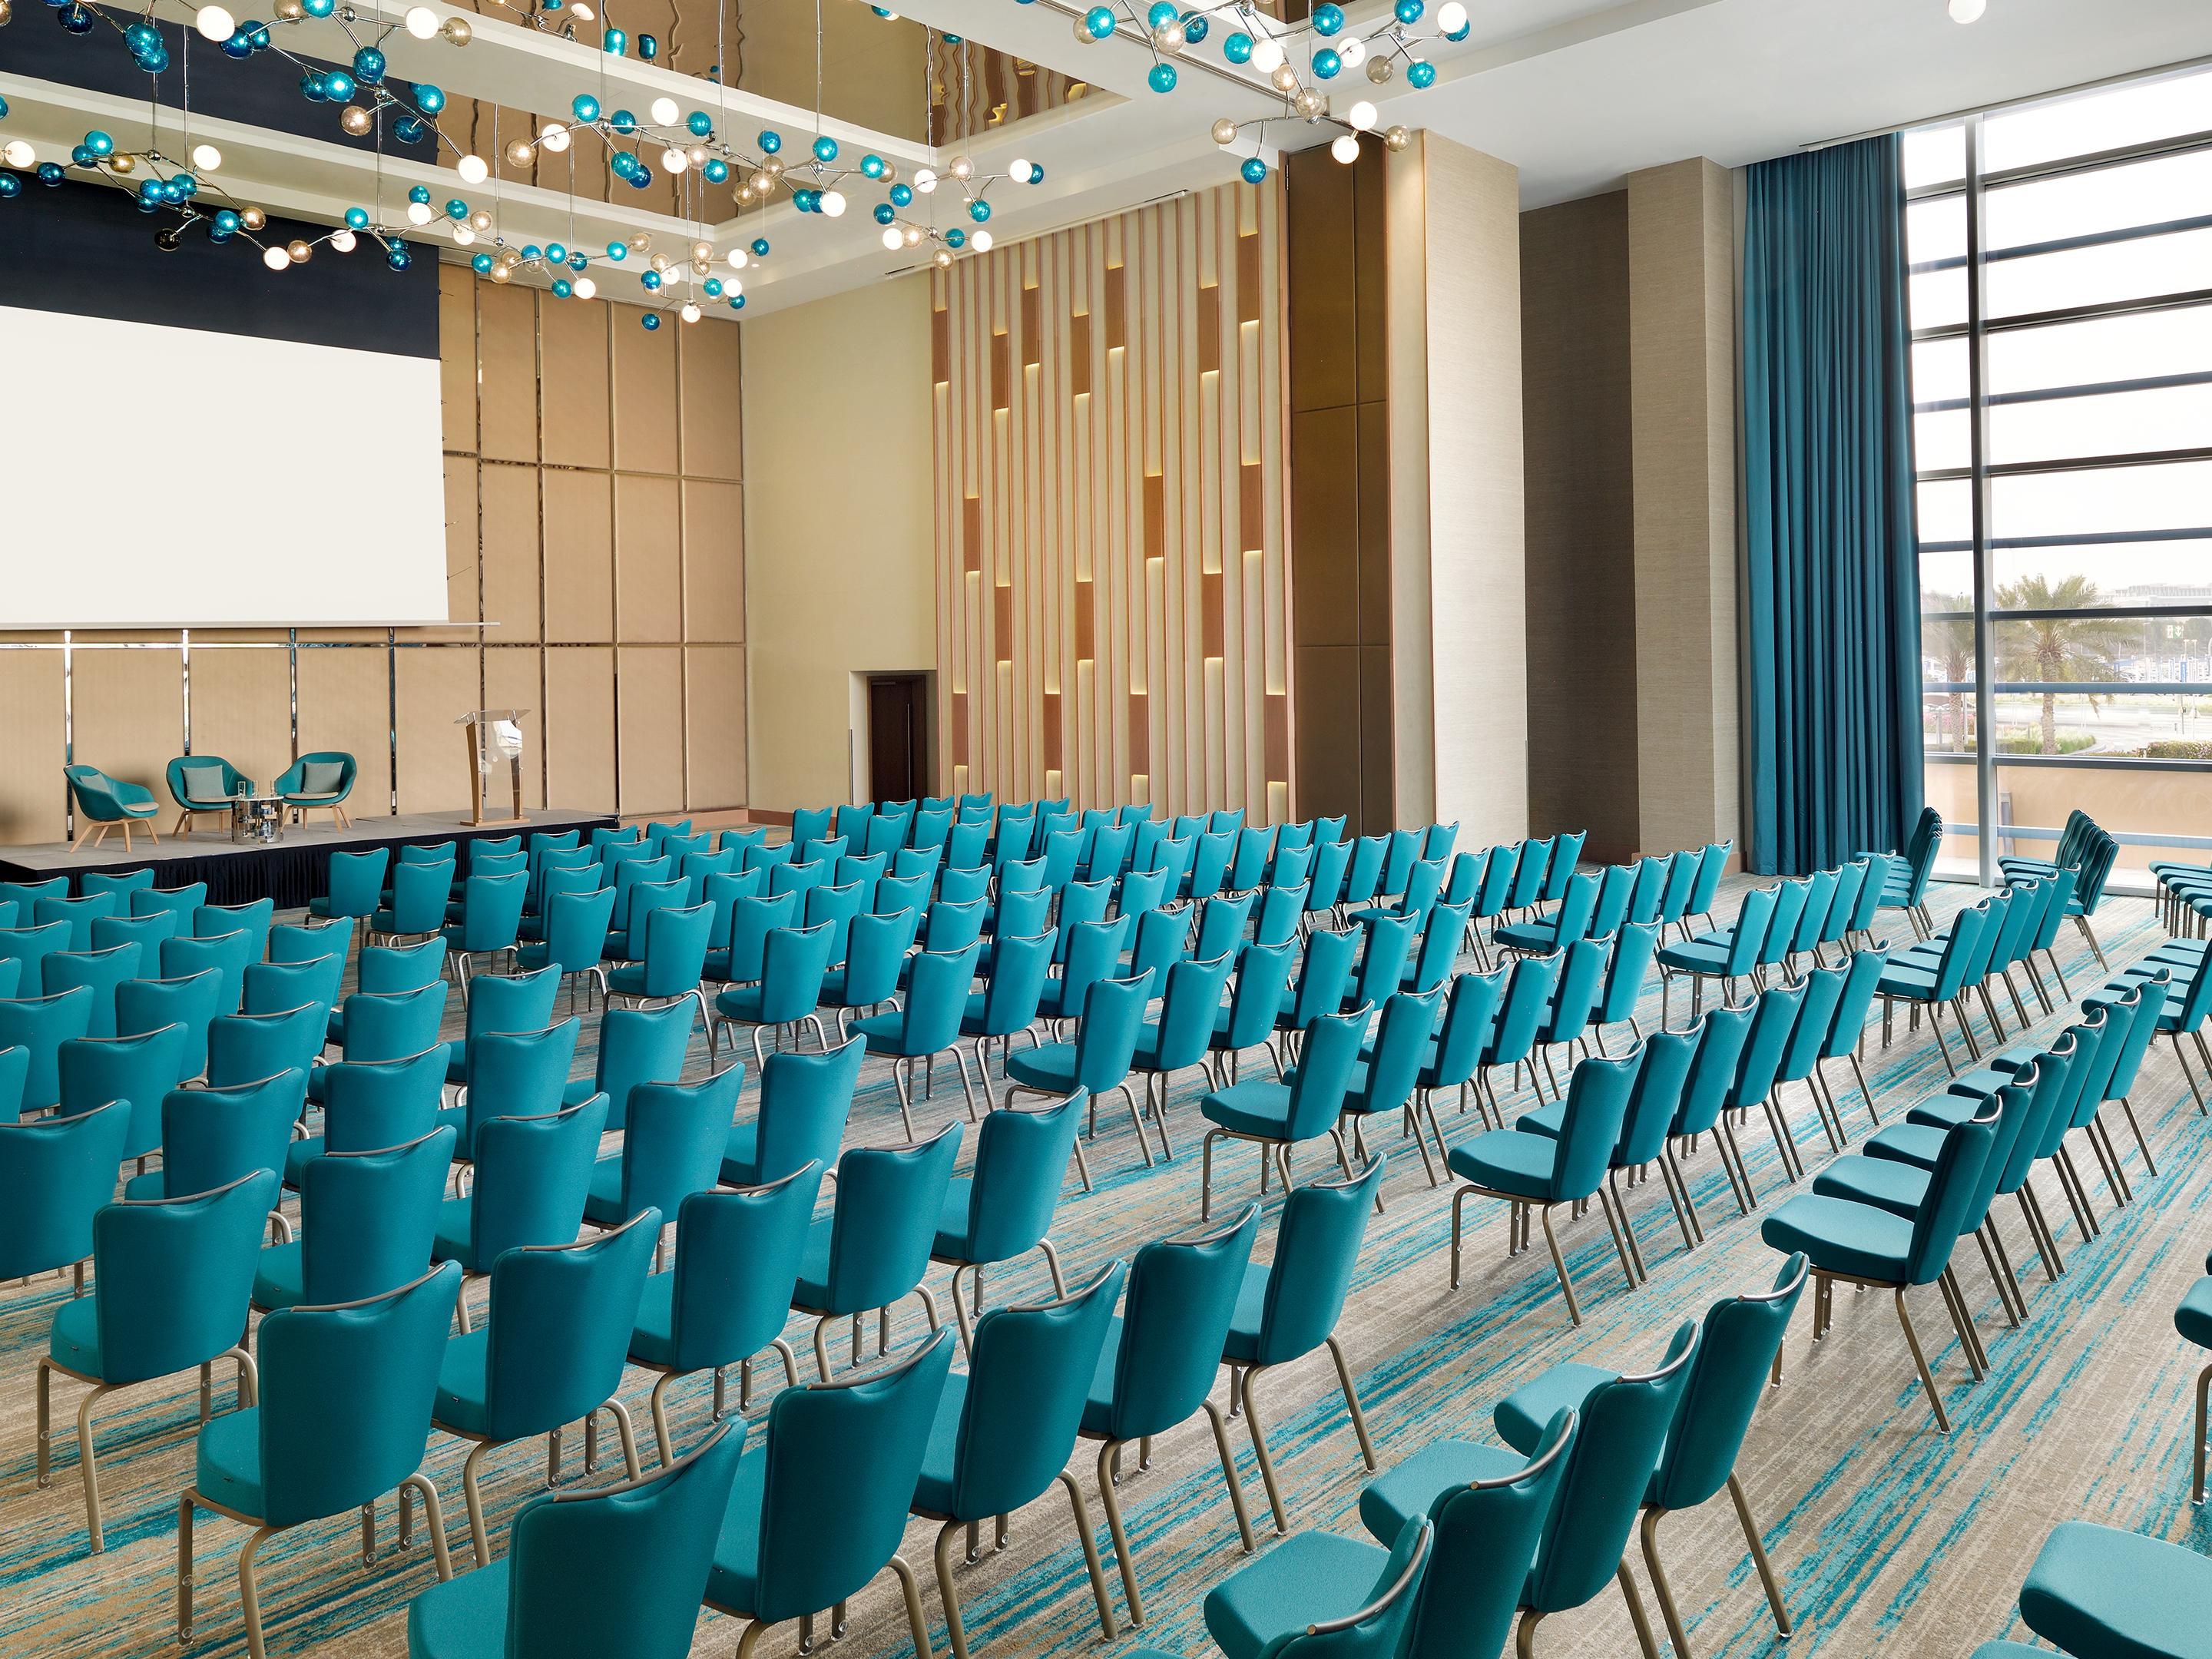 Holiday Inn Dubai Festival City provides spacious banquets and conference centre for your meetings and special events. Offering comprehensive audio-visual facilities with the latest technology and world-class state-of-the-art equipment.